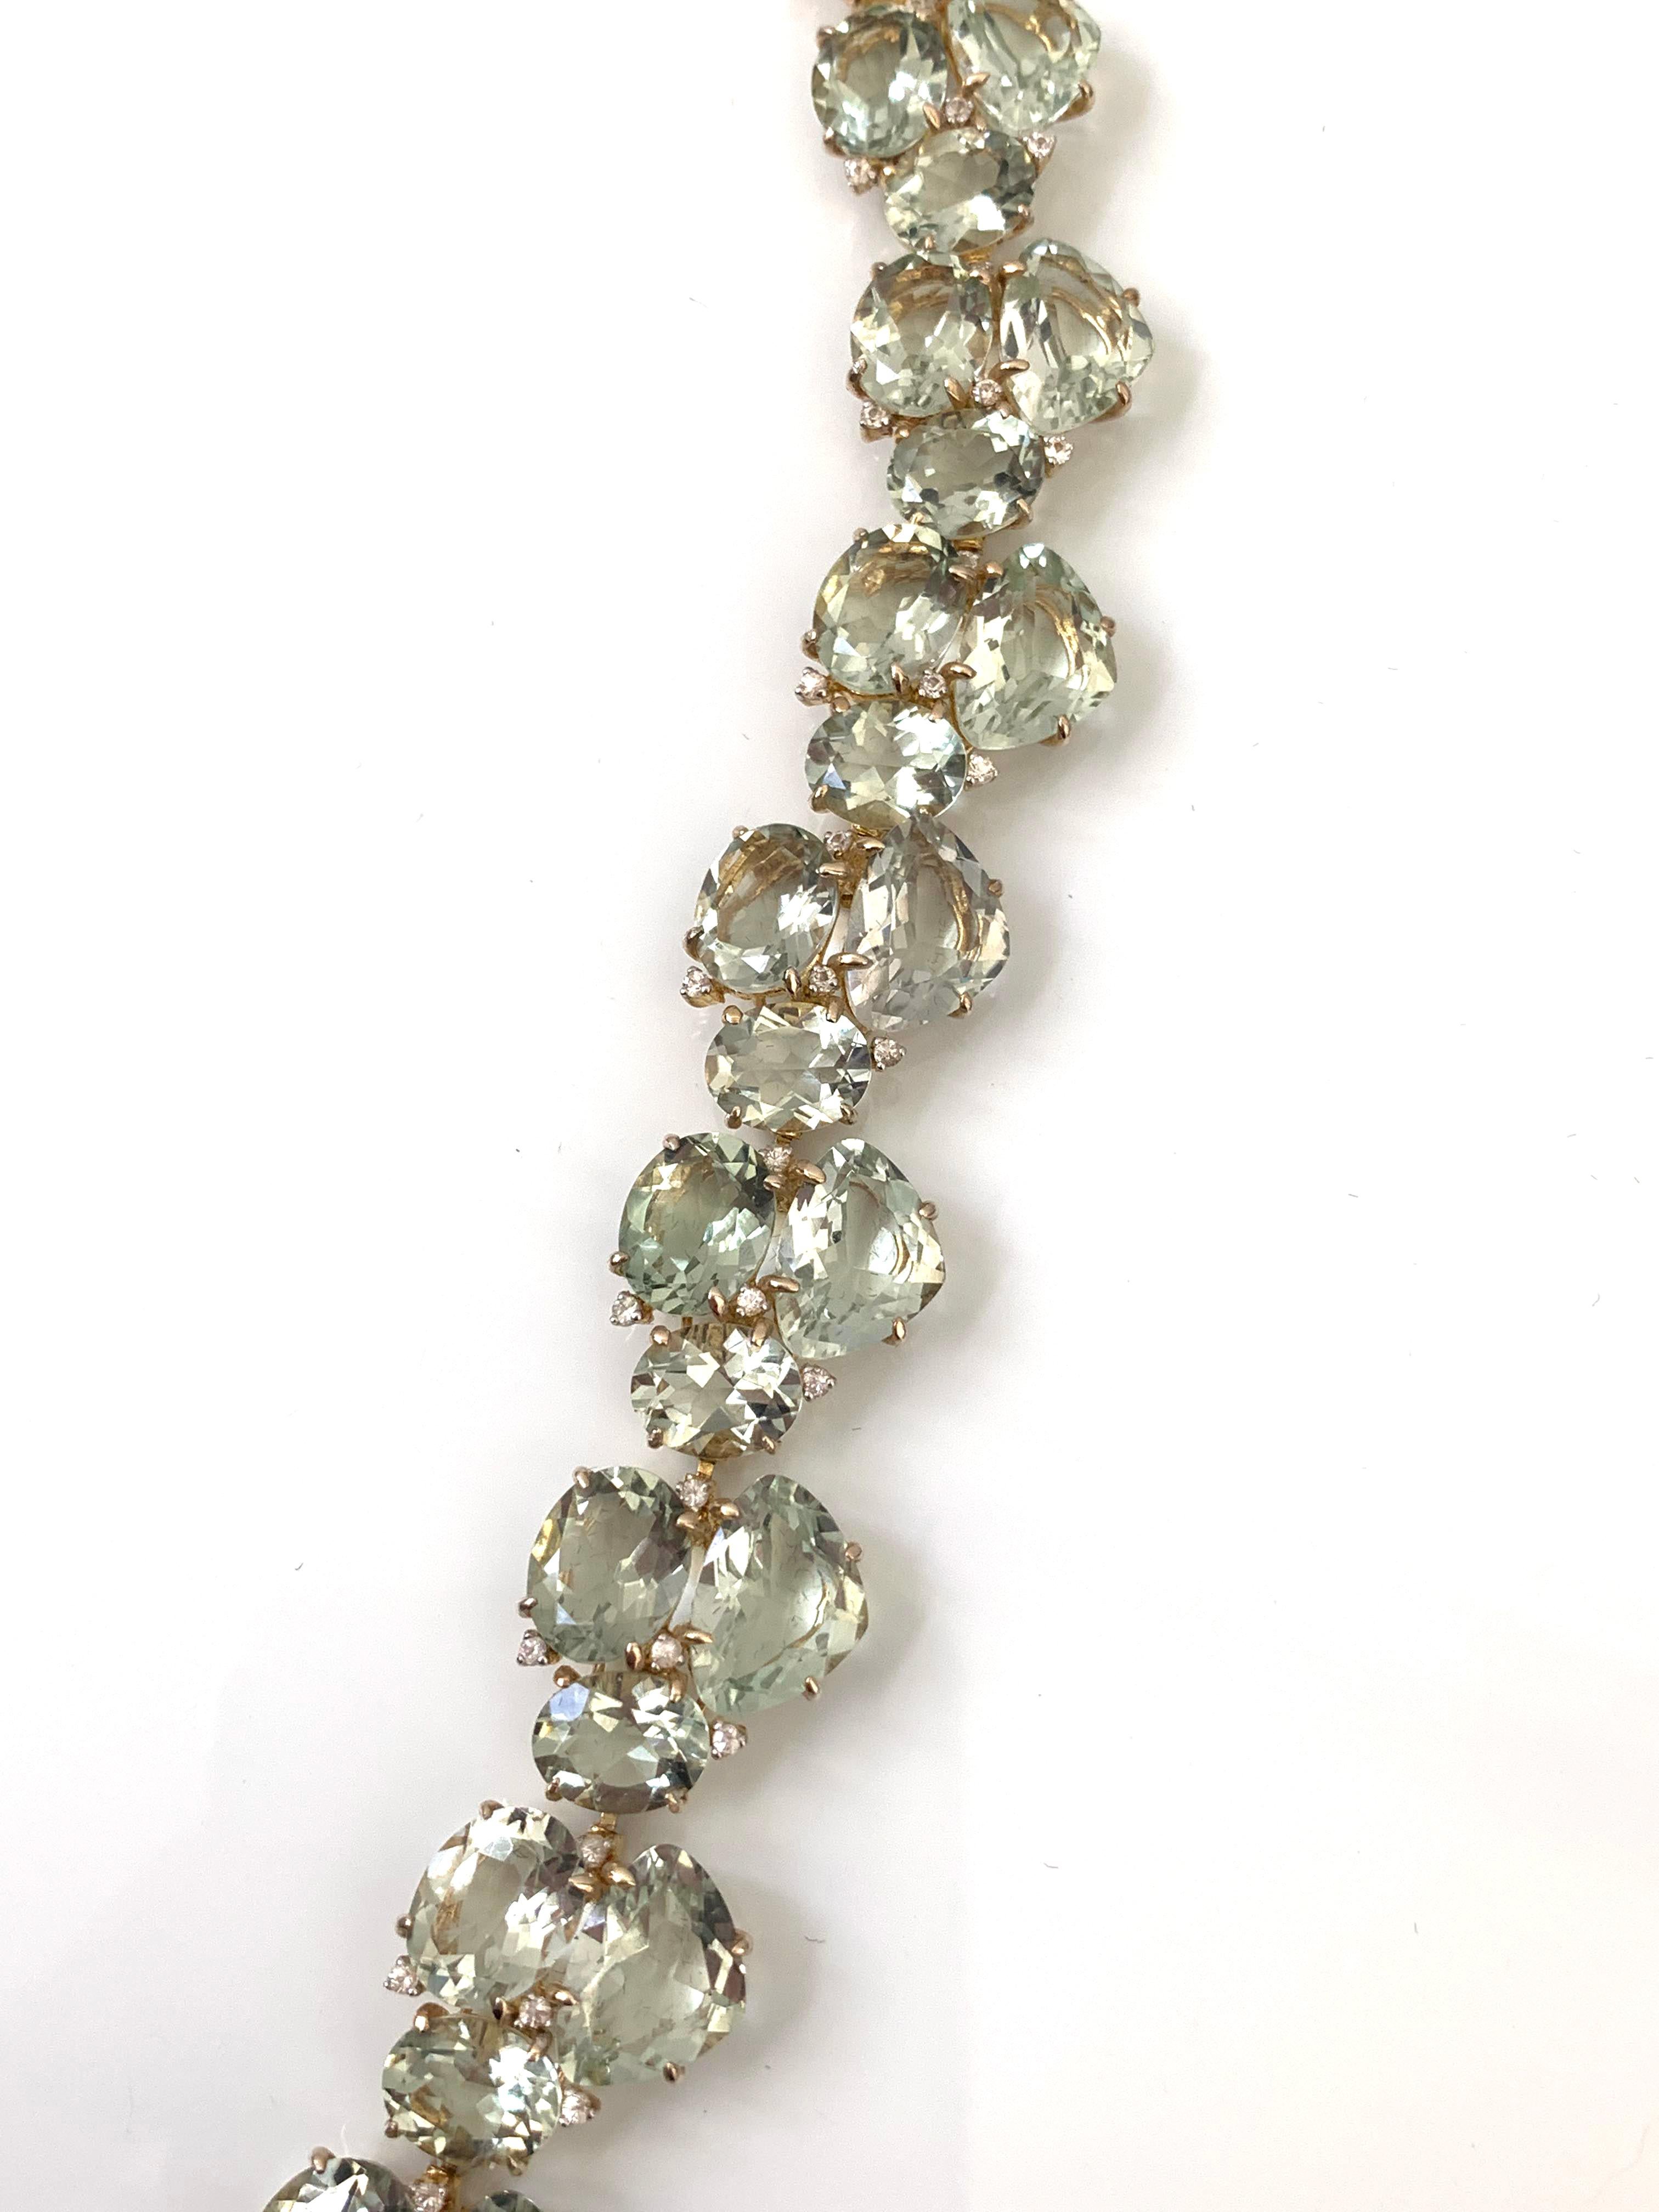 Elegant Green Amethyst and White Sapphire Bracelet. 70 pieces of concave-cut triangle green amethyst, oval green amethyst, and round white sapphires individually handset in vermeil 18k gold plated sterling silver. Push clasp lock with double safety